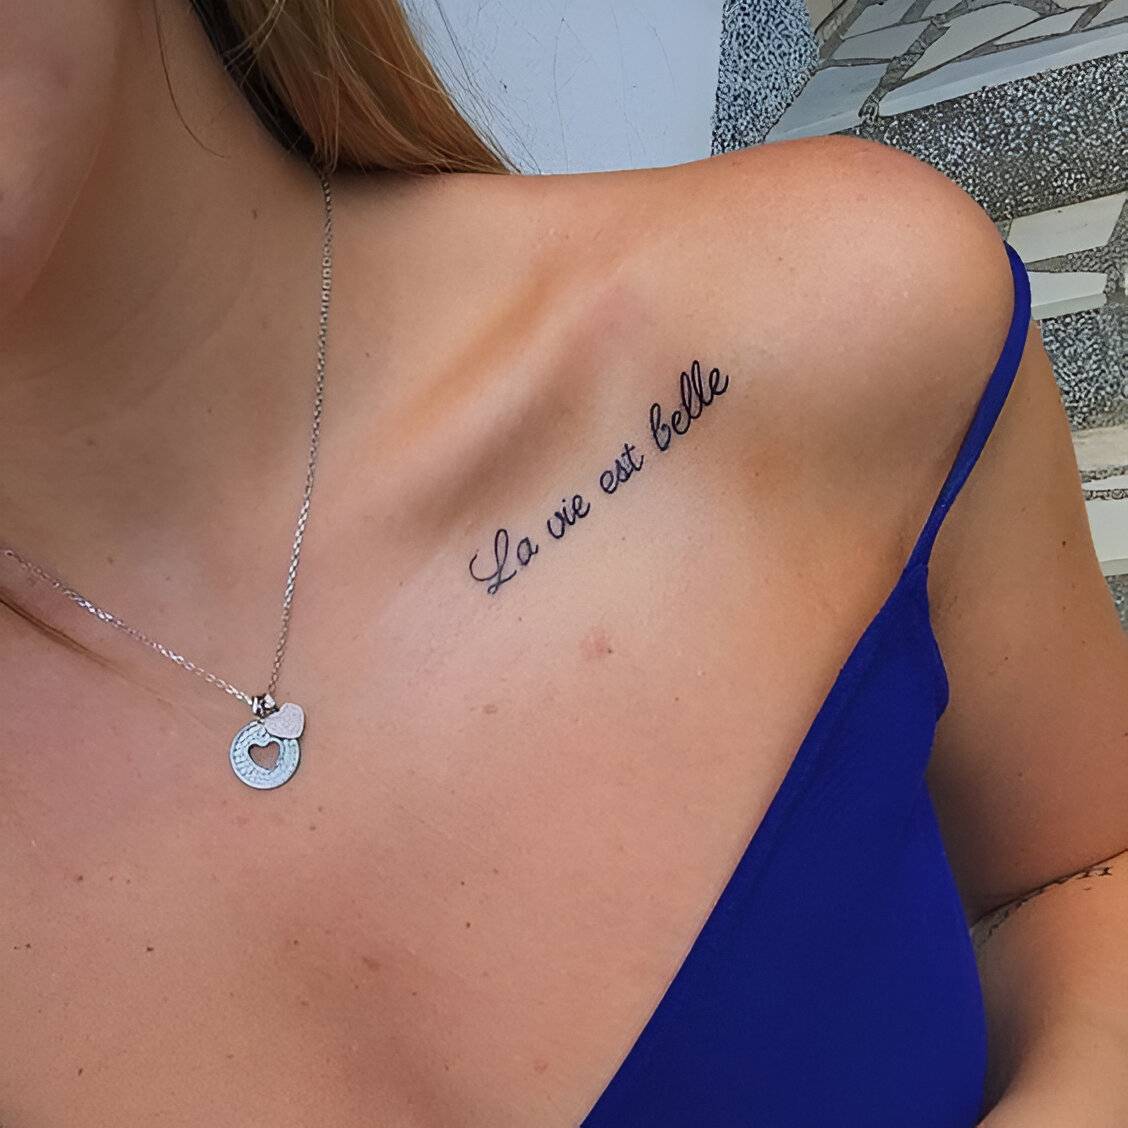 22 Meaningful Quote Tattoos To Bring Out Your Feminine Power - 167